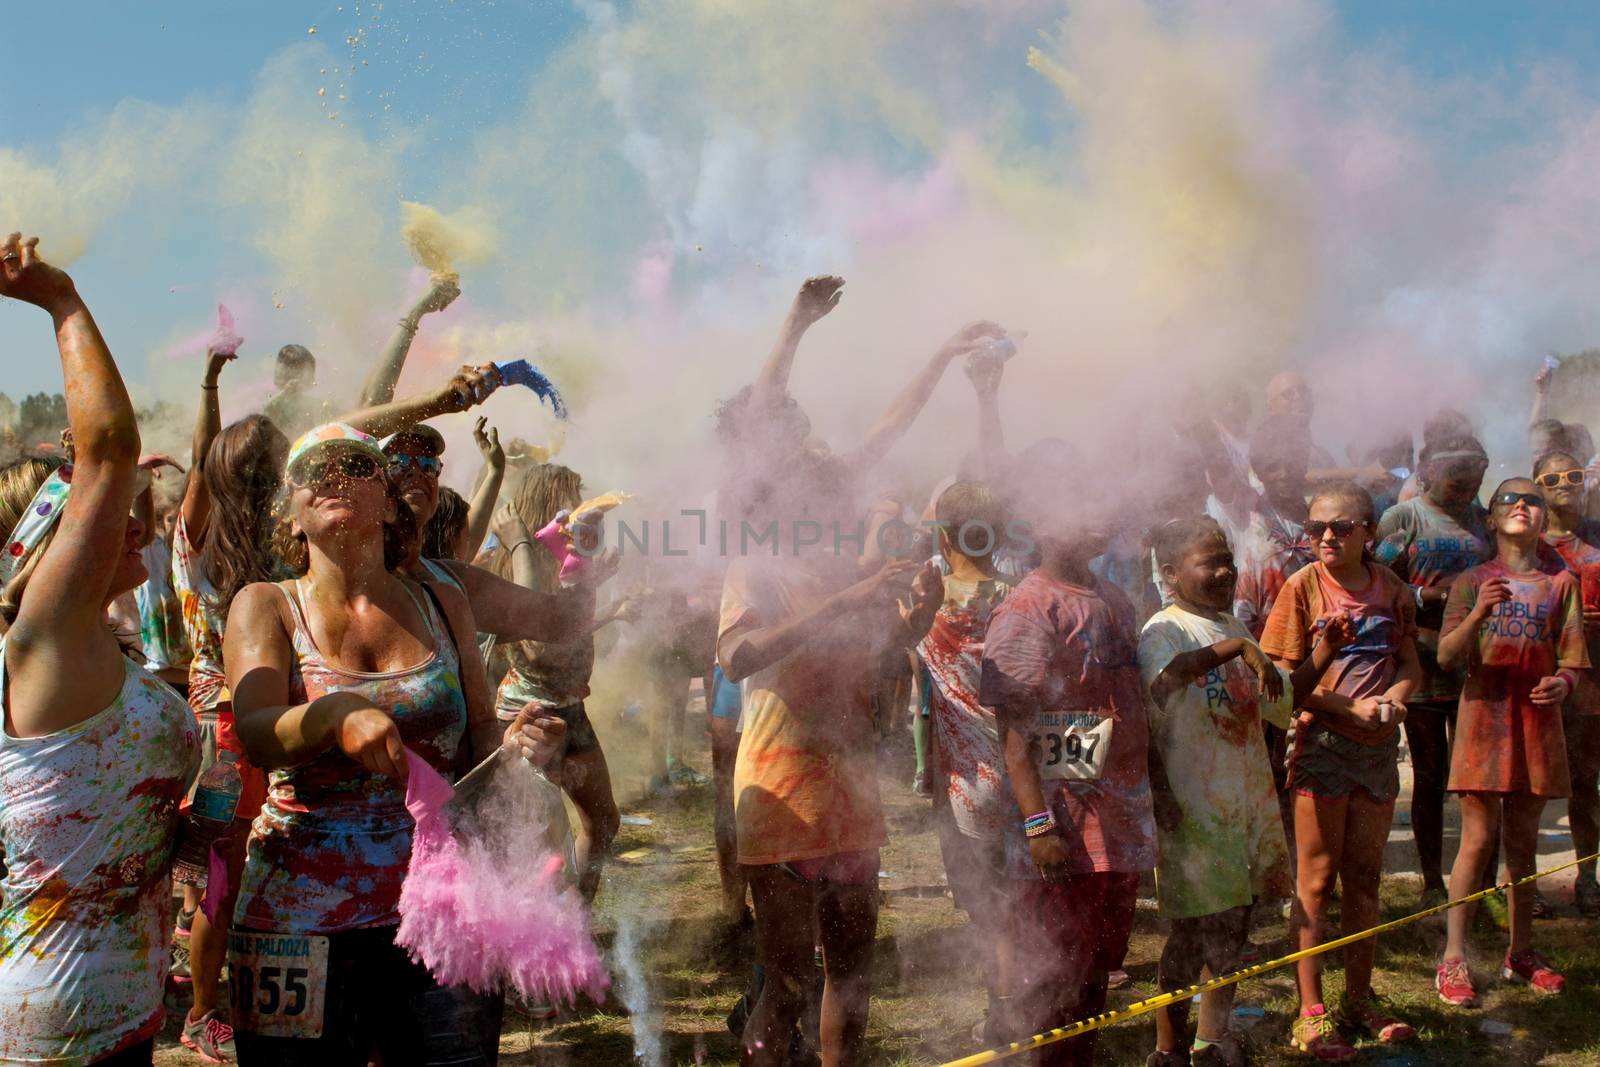 Lawrenceville, GA, USA - May 31, 2014:  People throw packets of colored corn starch in the air to get doused in color at Bubble Palooza.